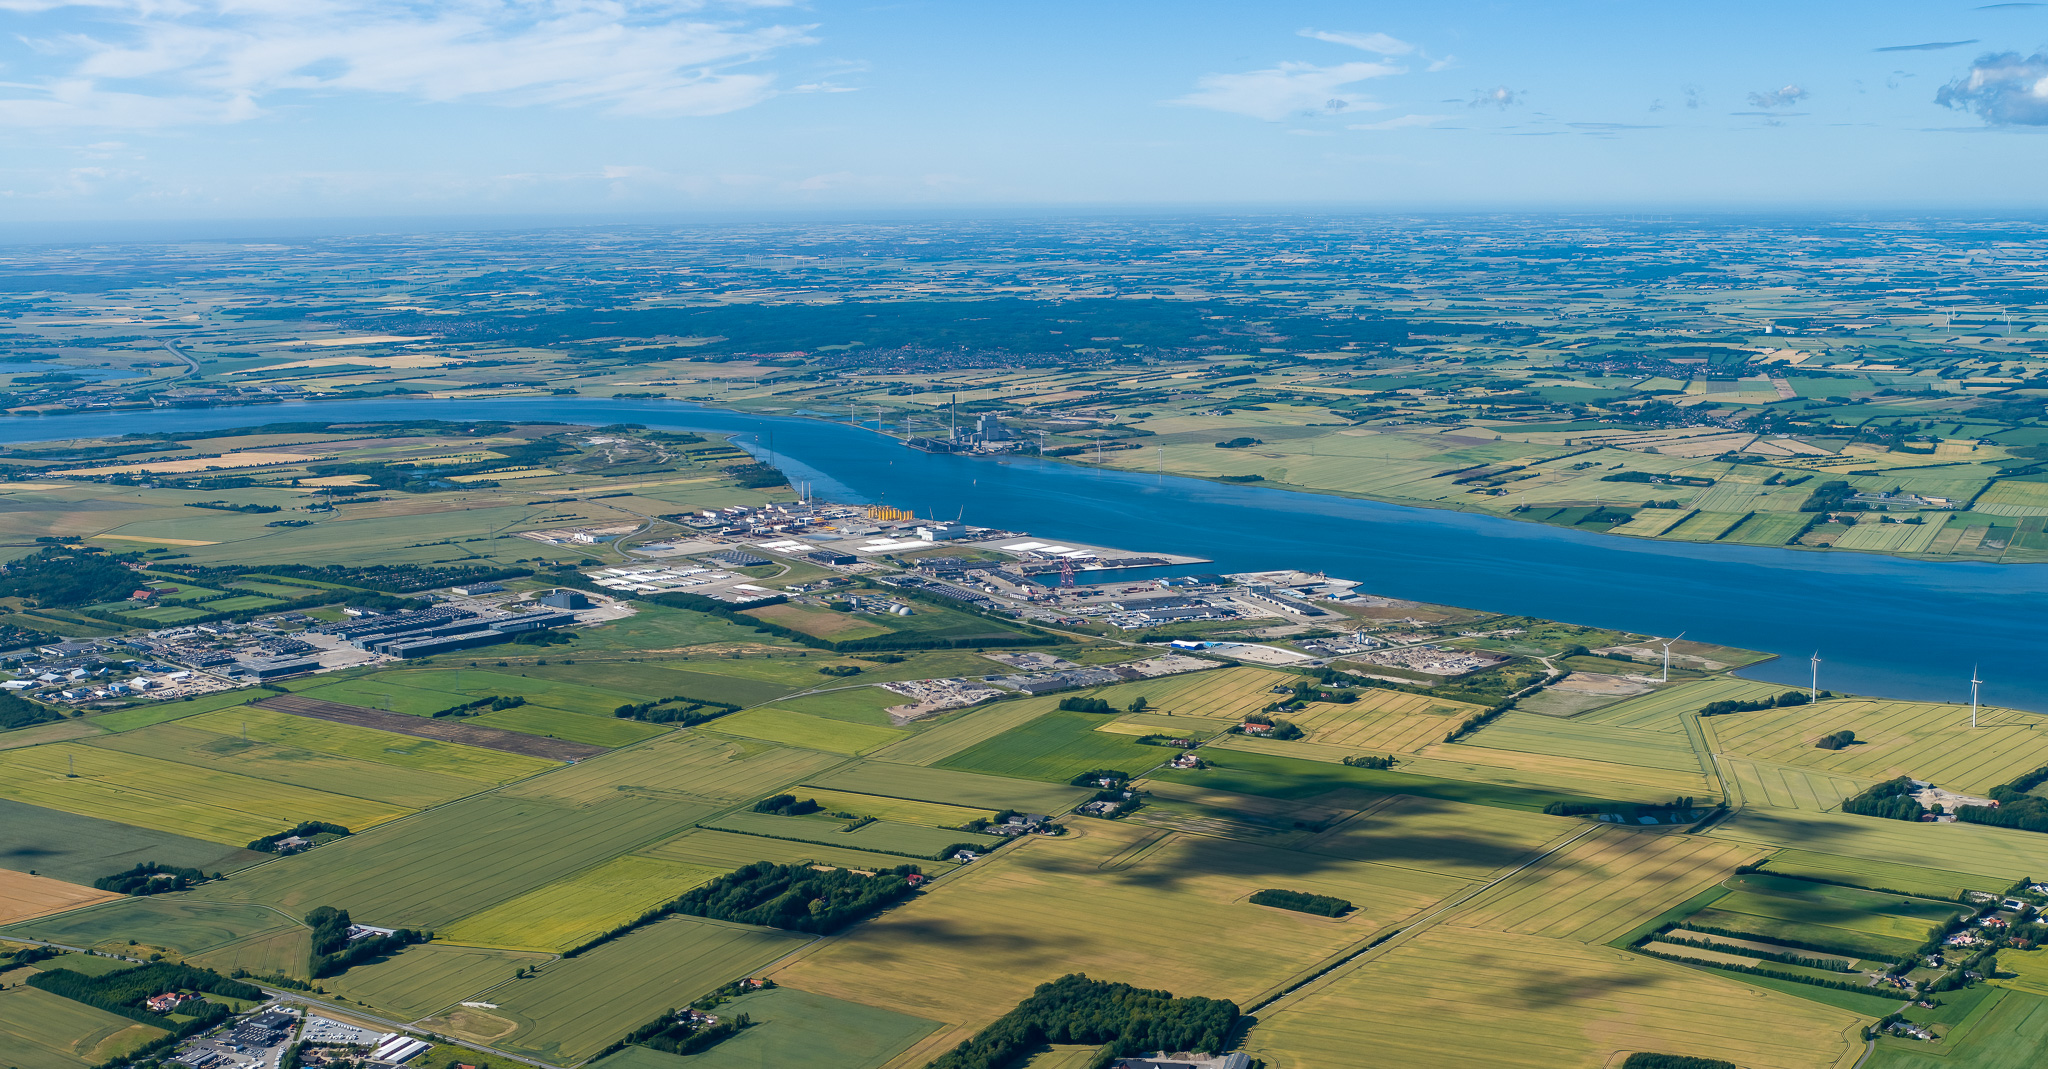 Port of Aalborg: Production and knowledge hub for wind and green transition